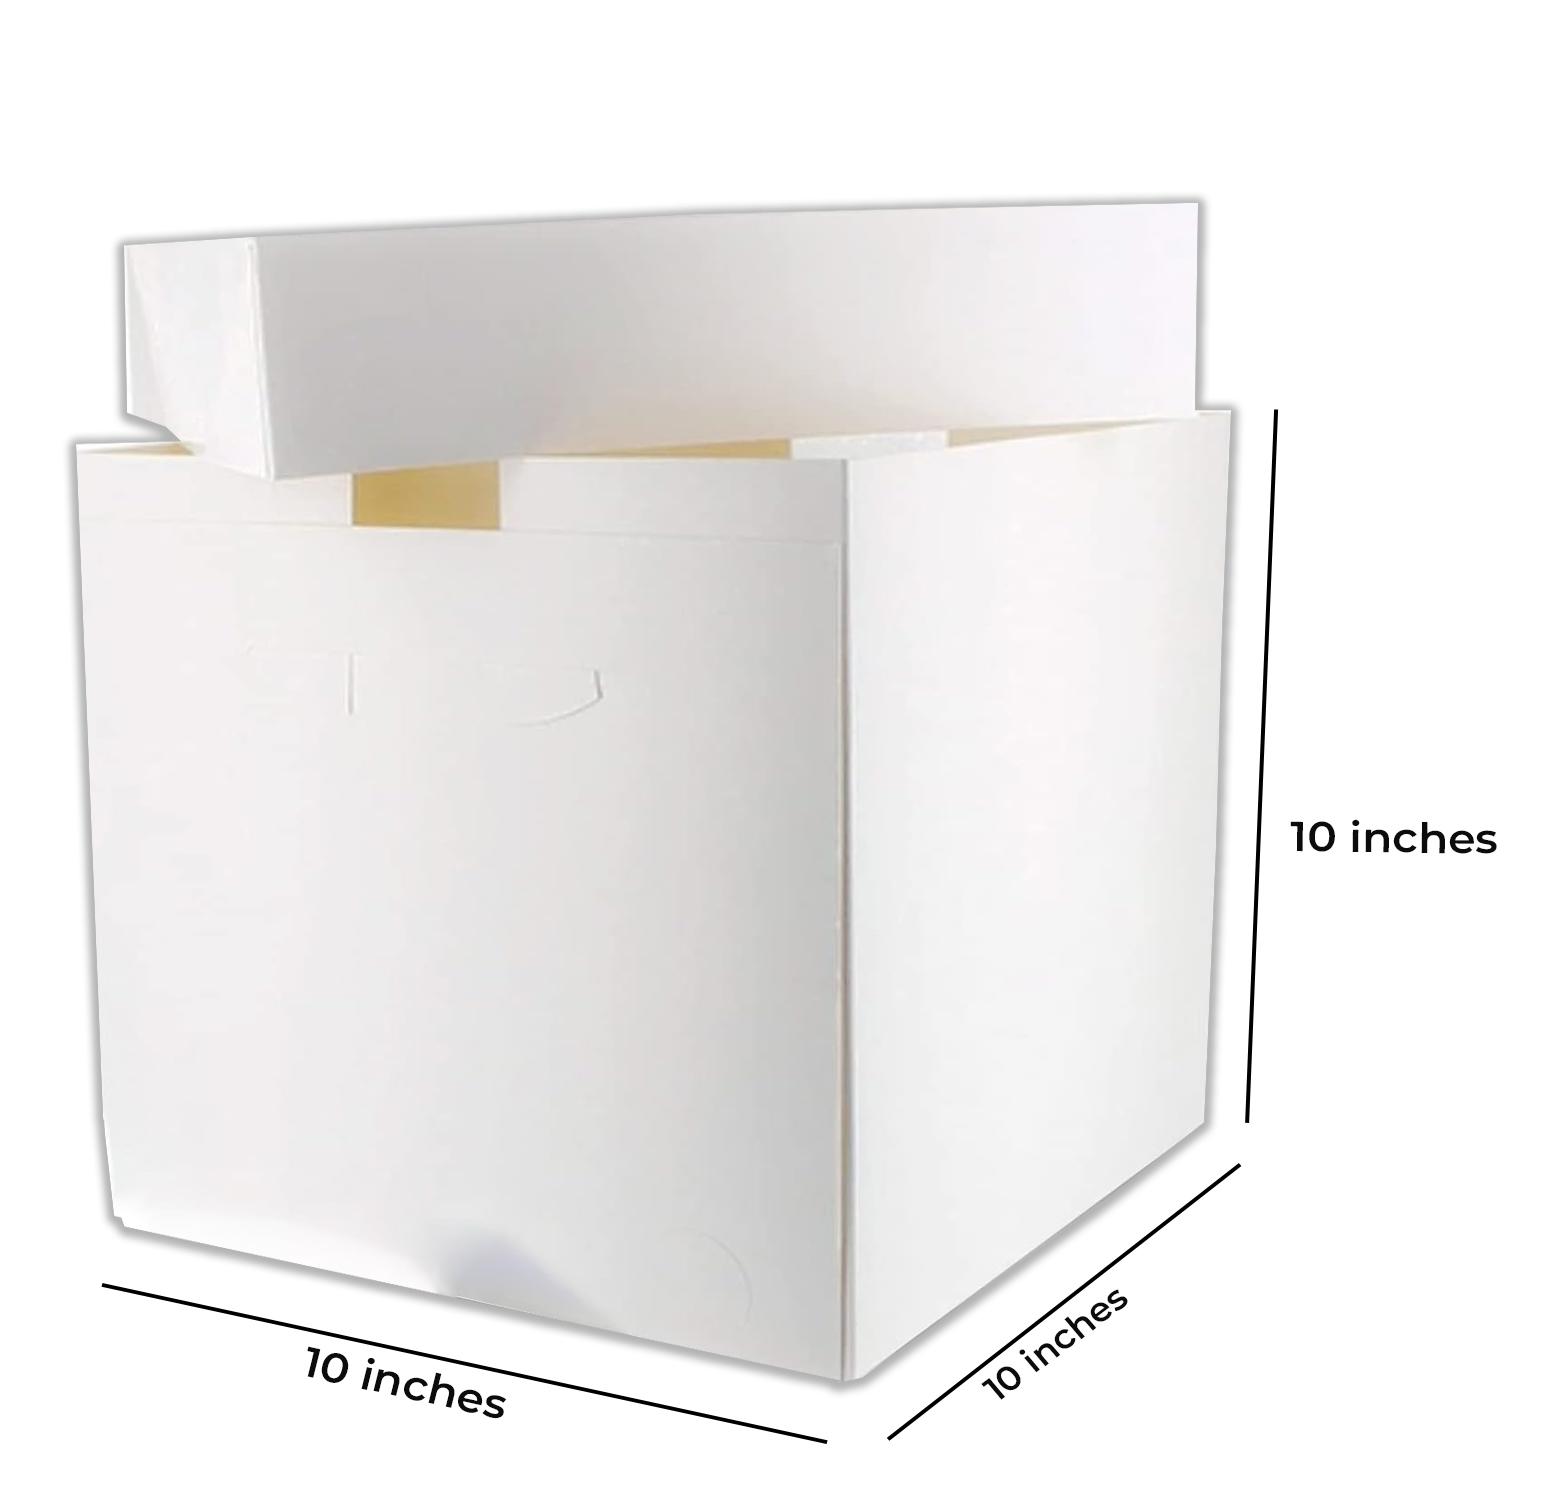 10" X10" X10" TALL WHITE CAKE BOX WITH LID